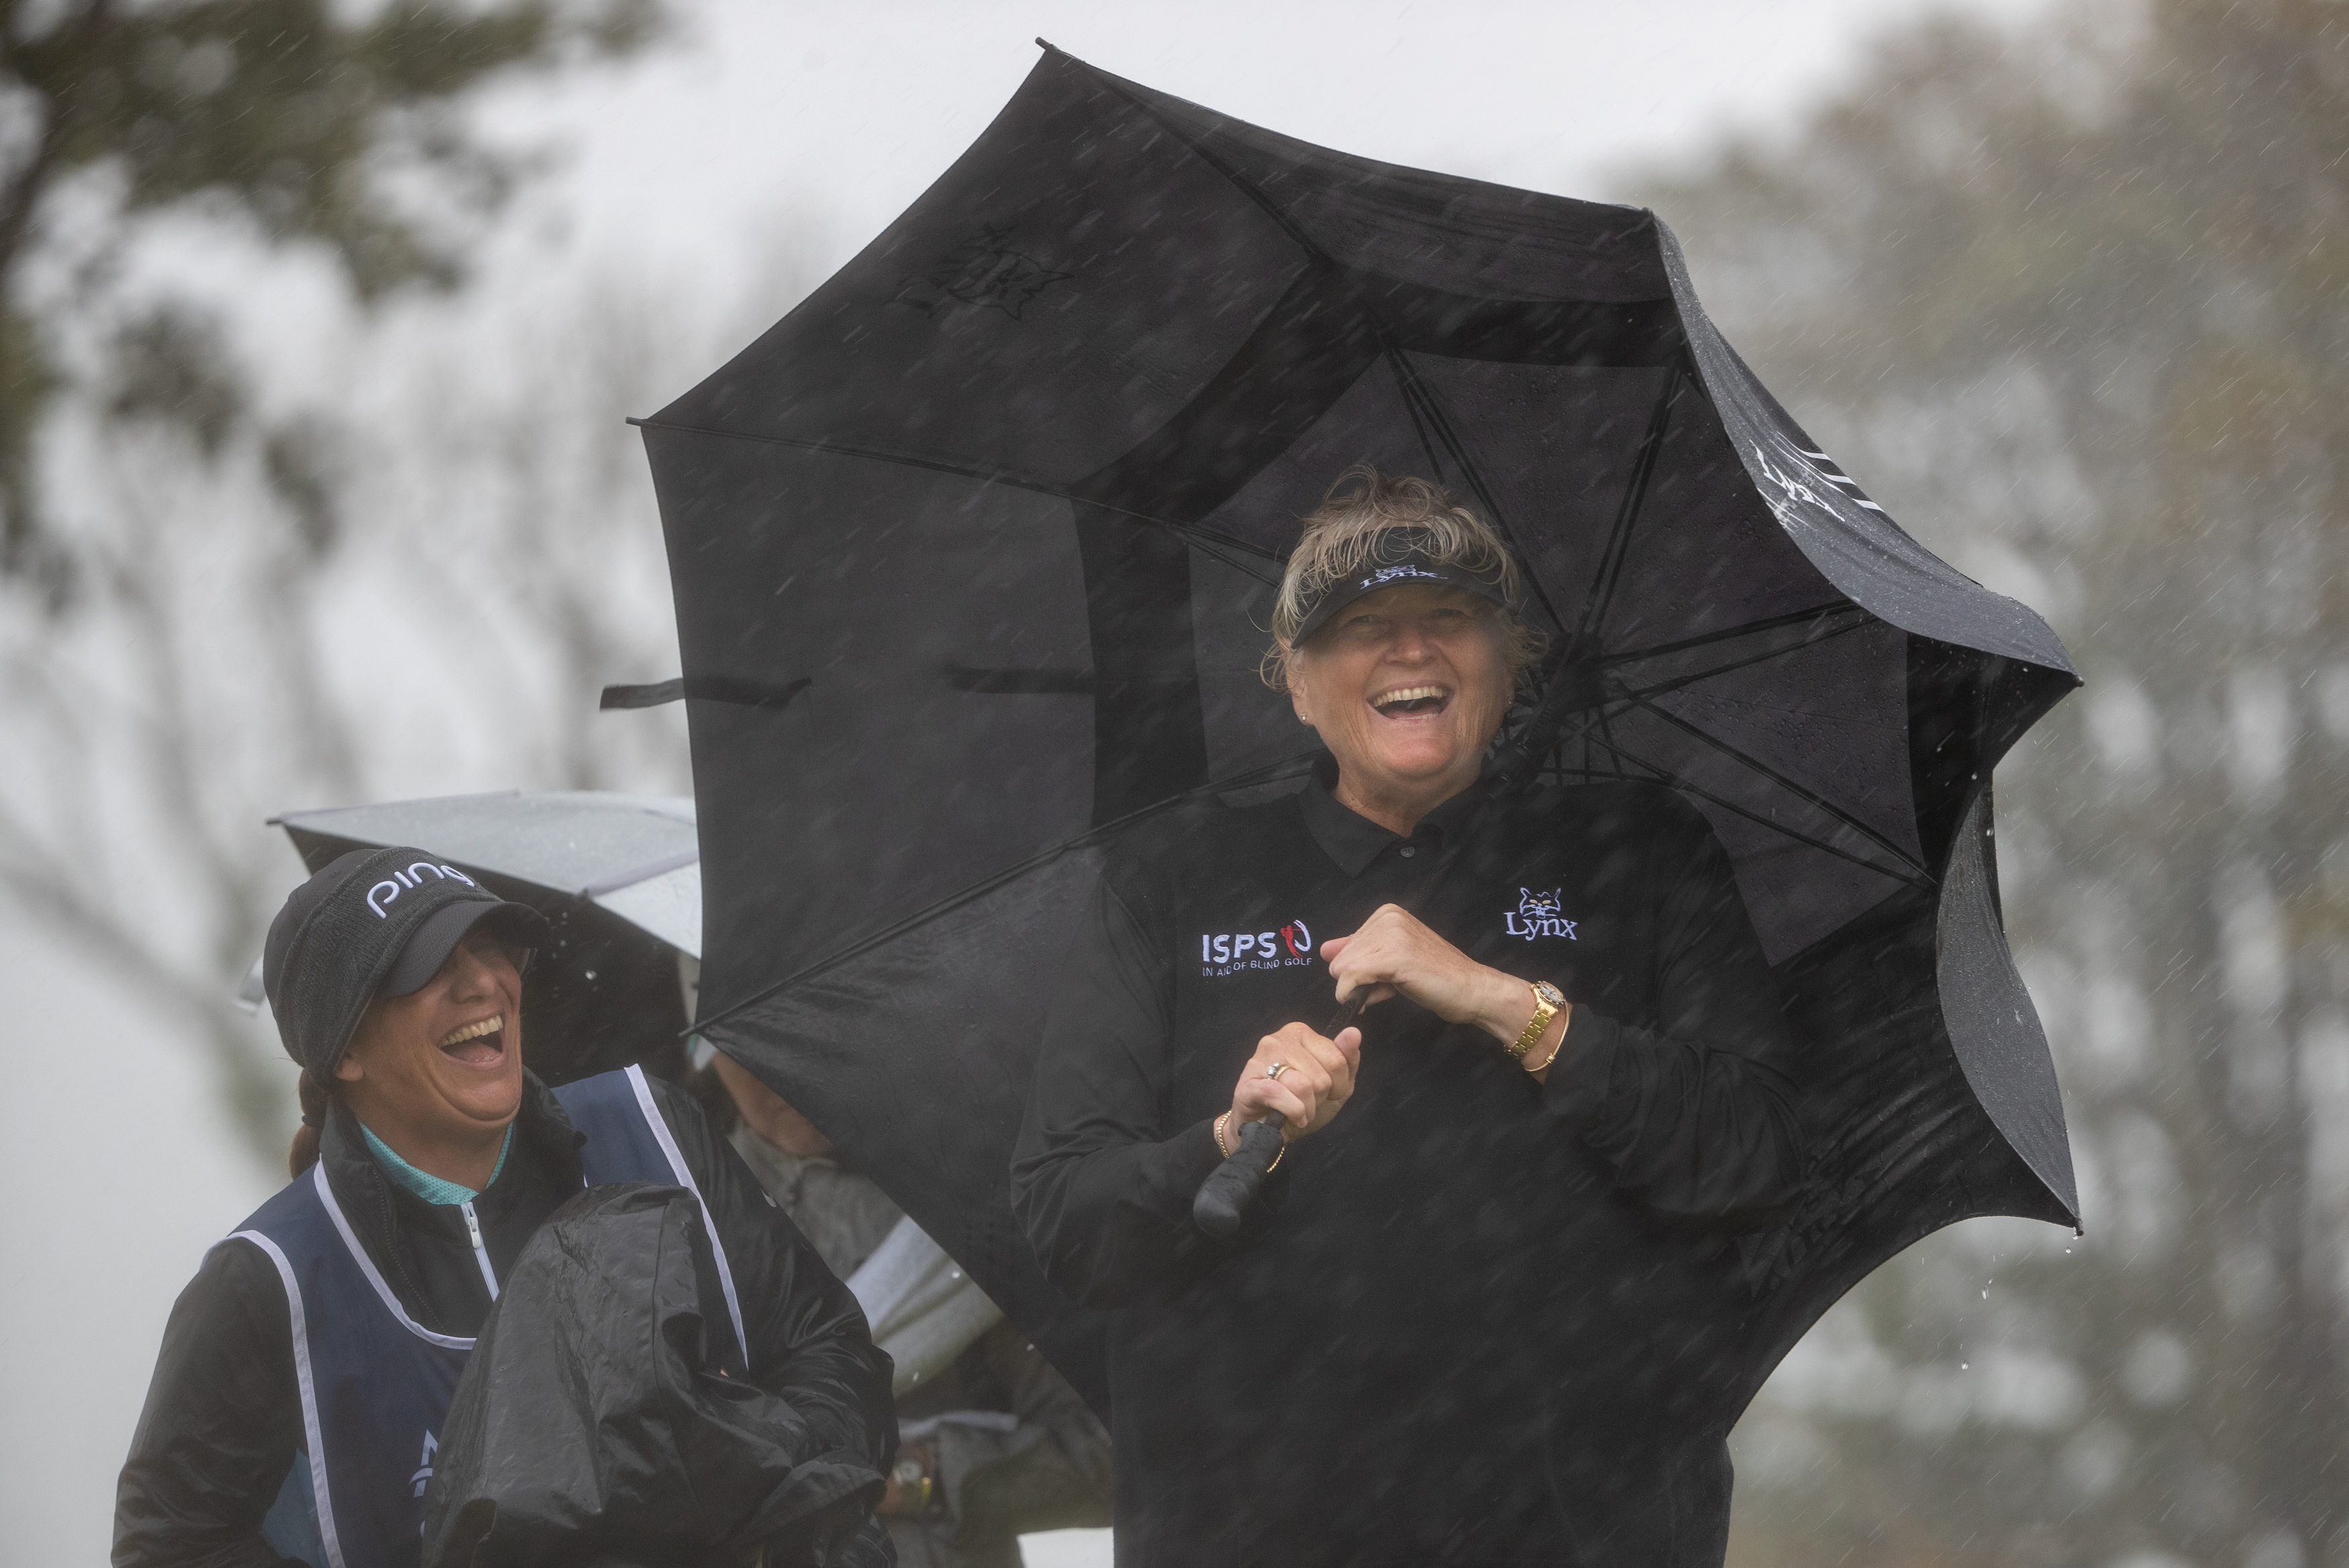 England's Dame Laura Davies continues to smile through the driving wind and rain during day two of the Aberdeen Standard Investments Ladies Scottish Open.